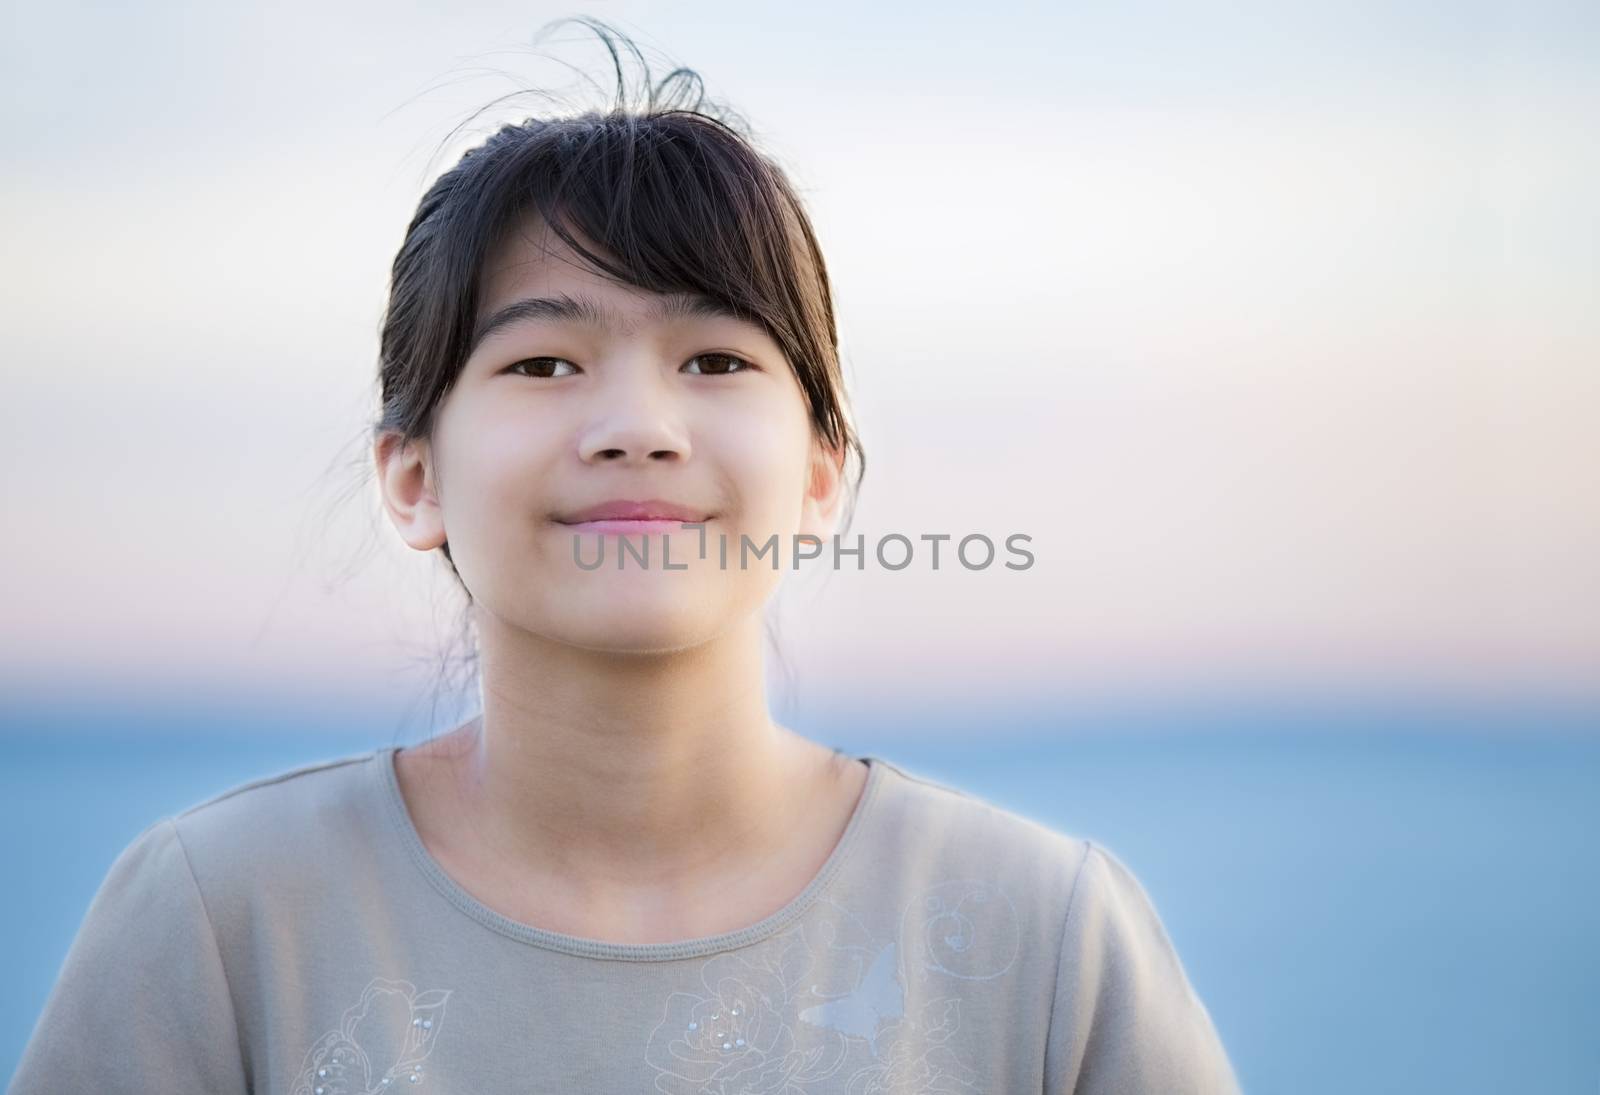 Beautiful young preteen girl enjoying outdoors by lake at sunset by jarenwicklund